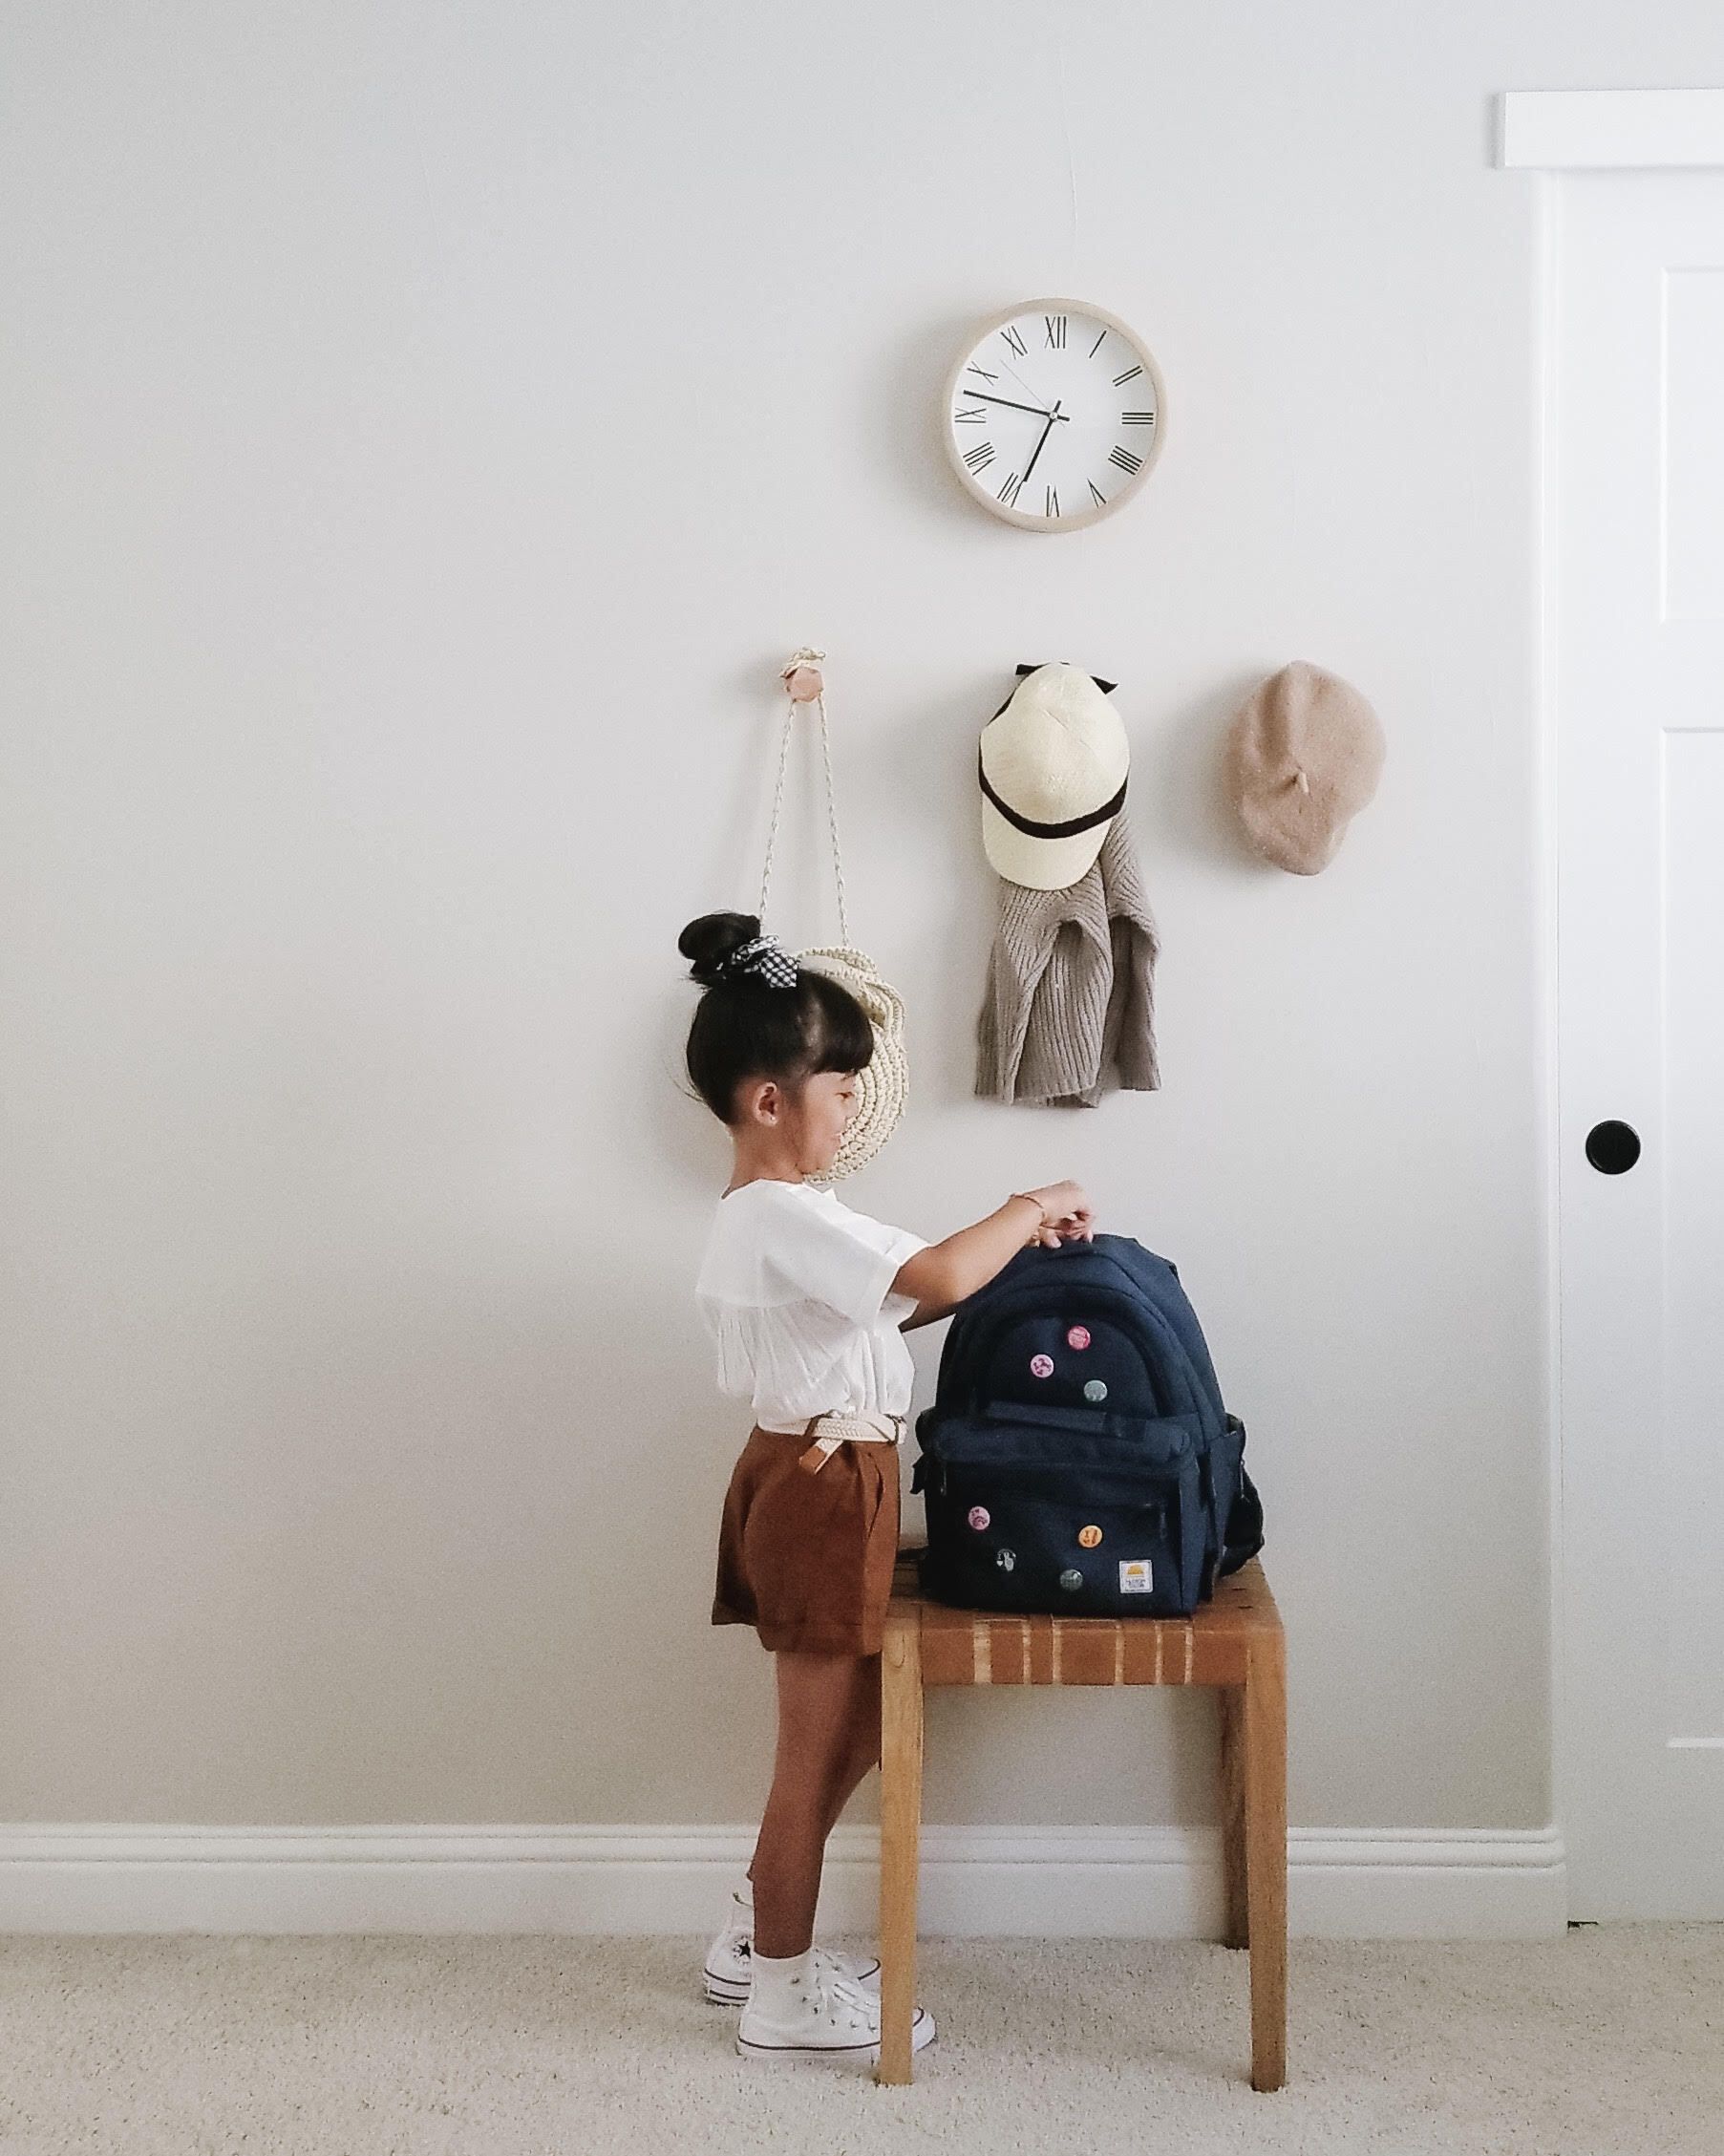 6 Pro Tips for Getting Kids to Pose for Back-to-School Pictures